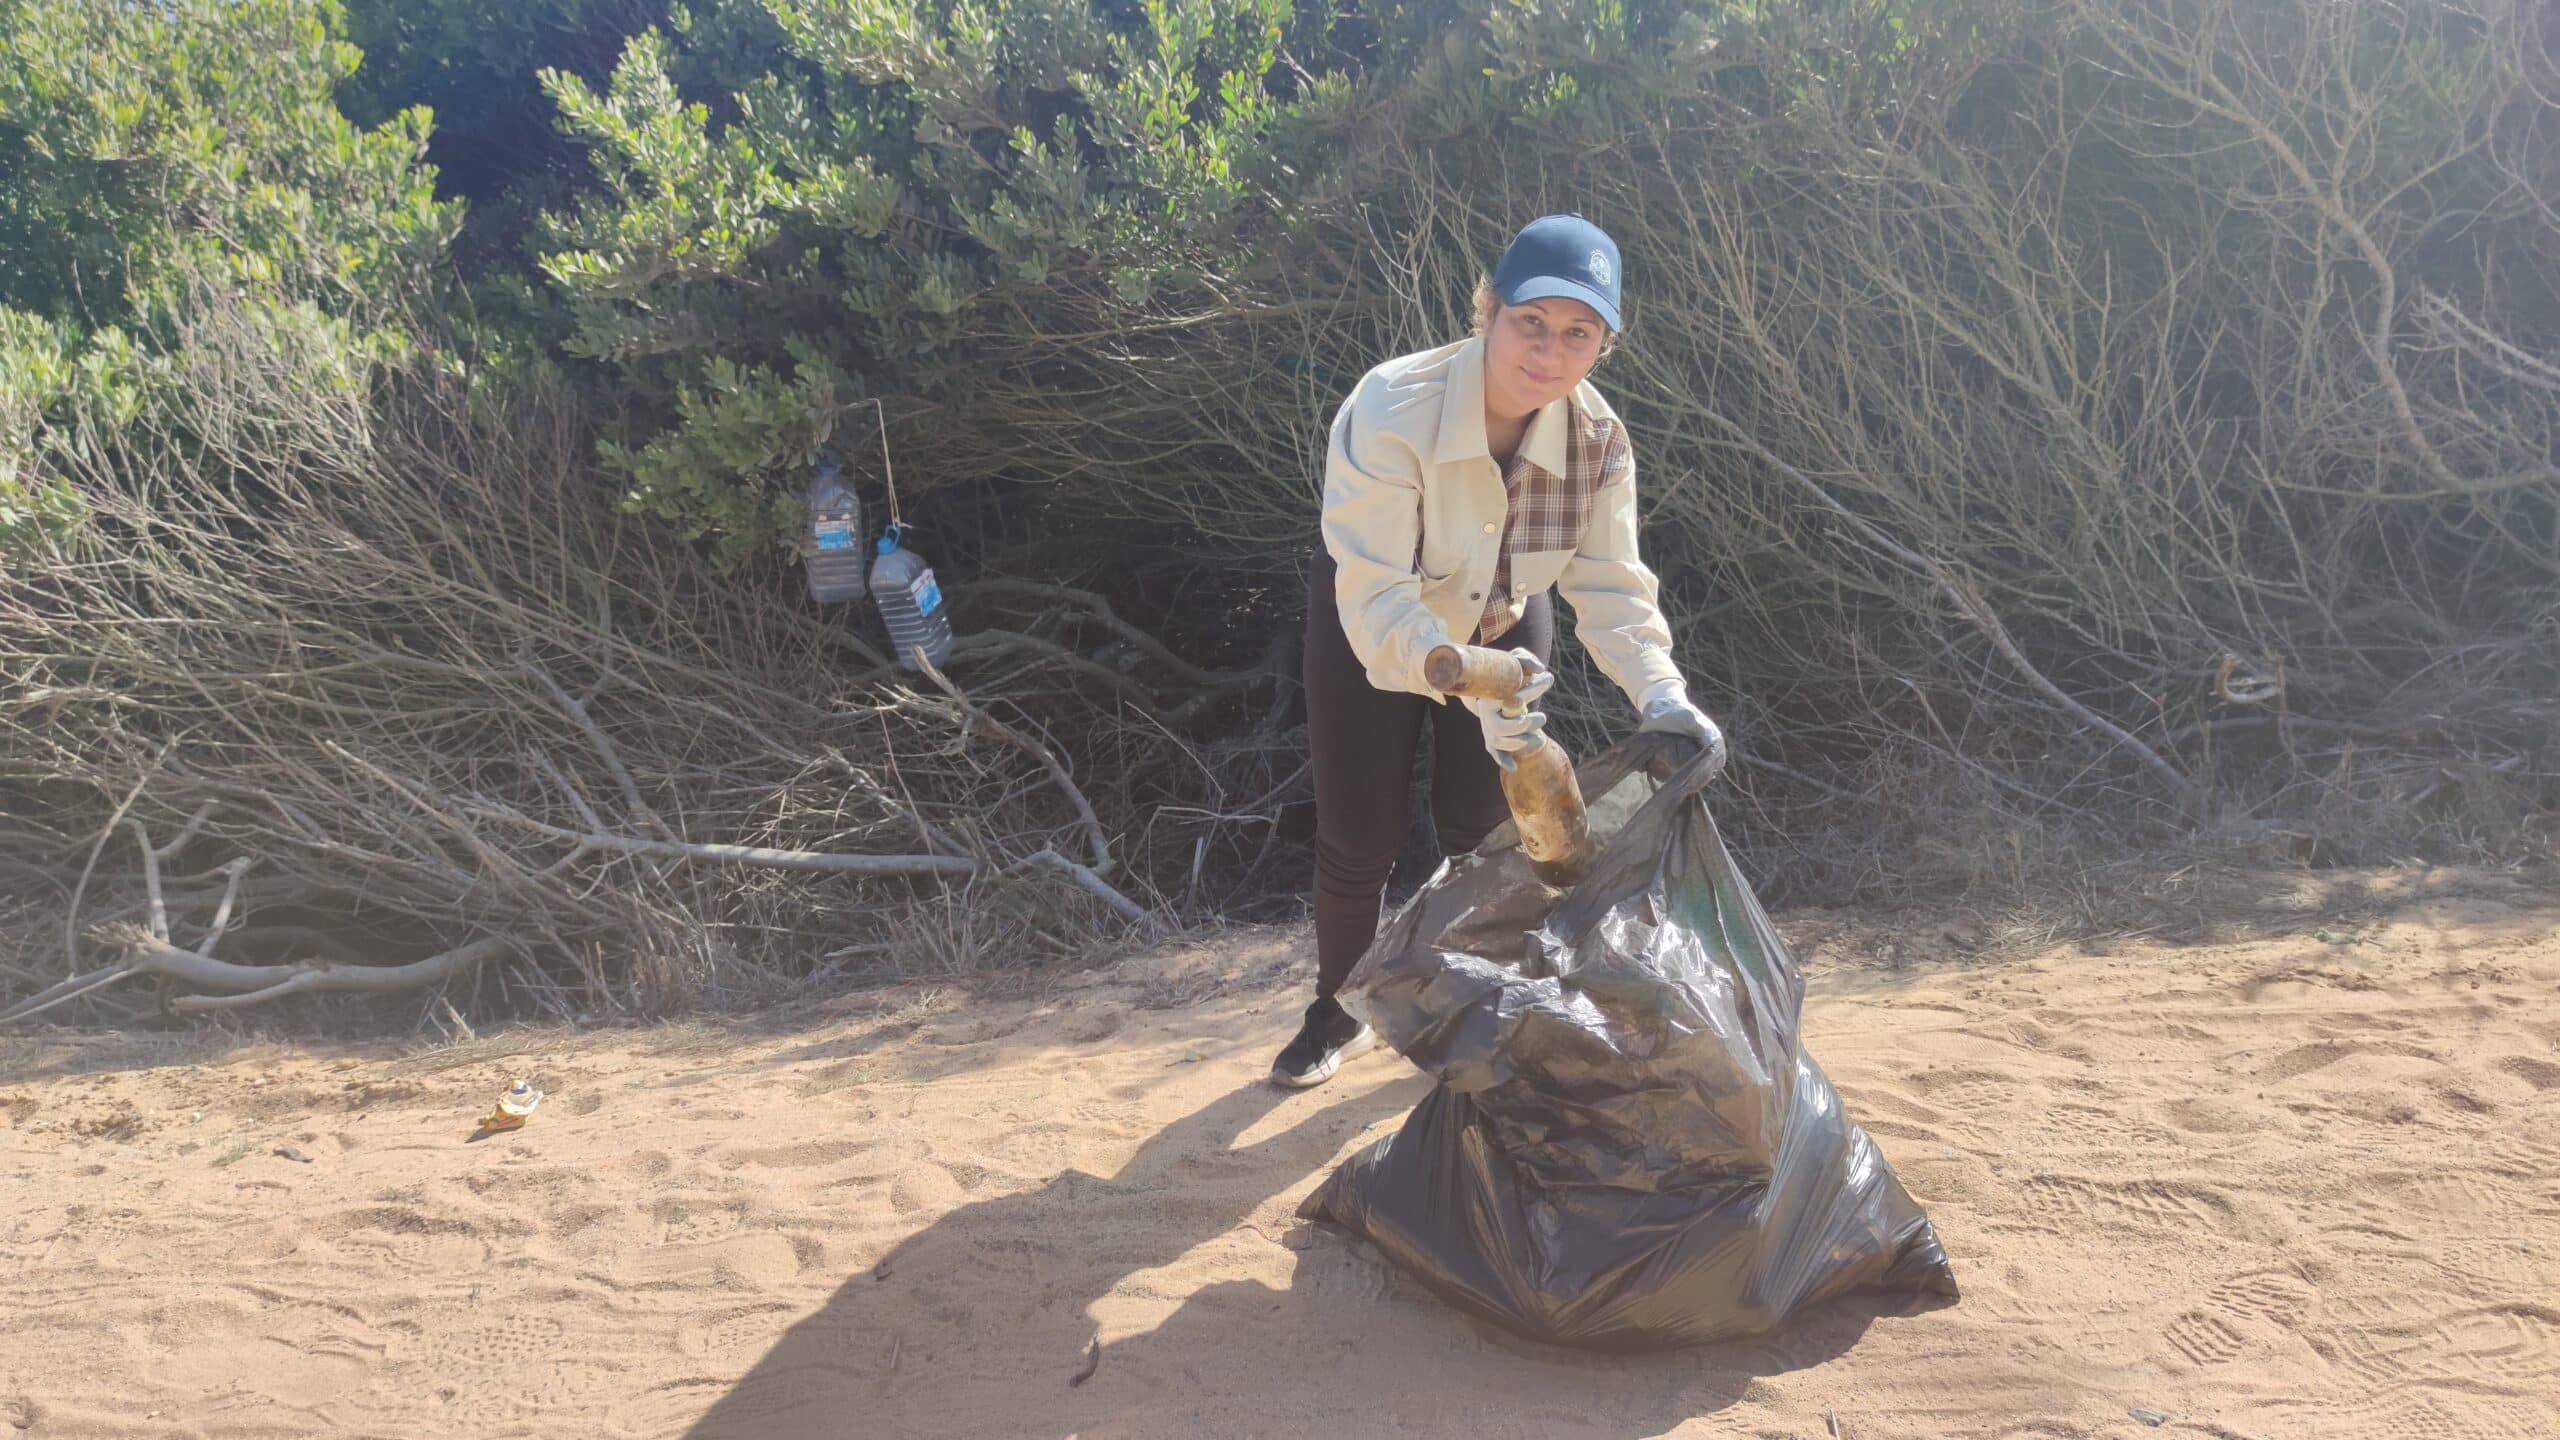 Celebration of International Coastal Cleanup Day in Portugal